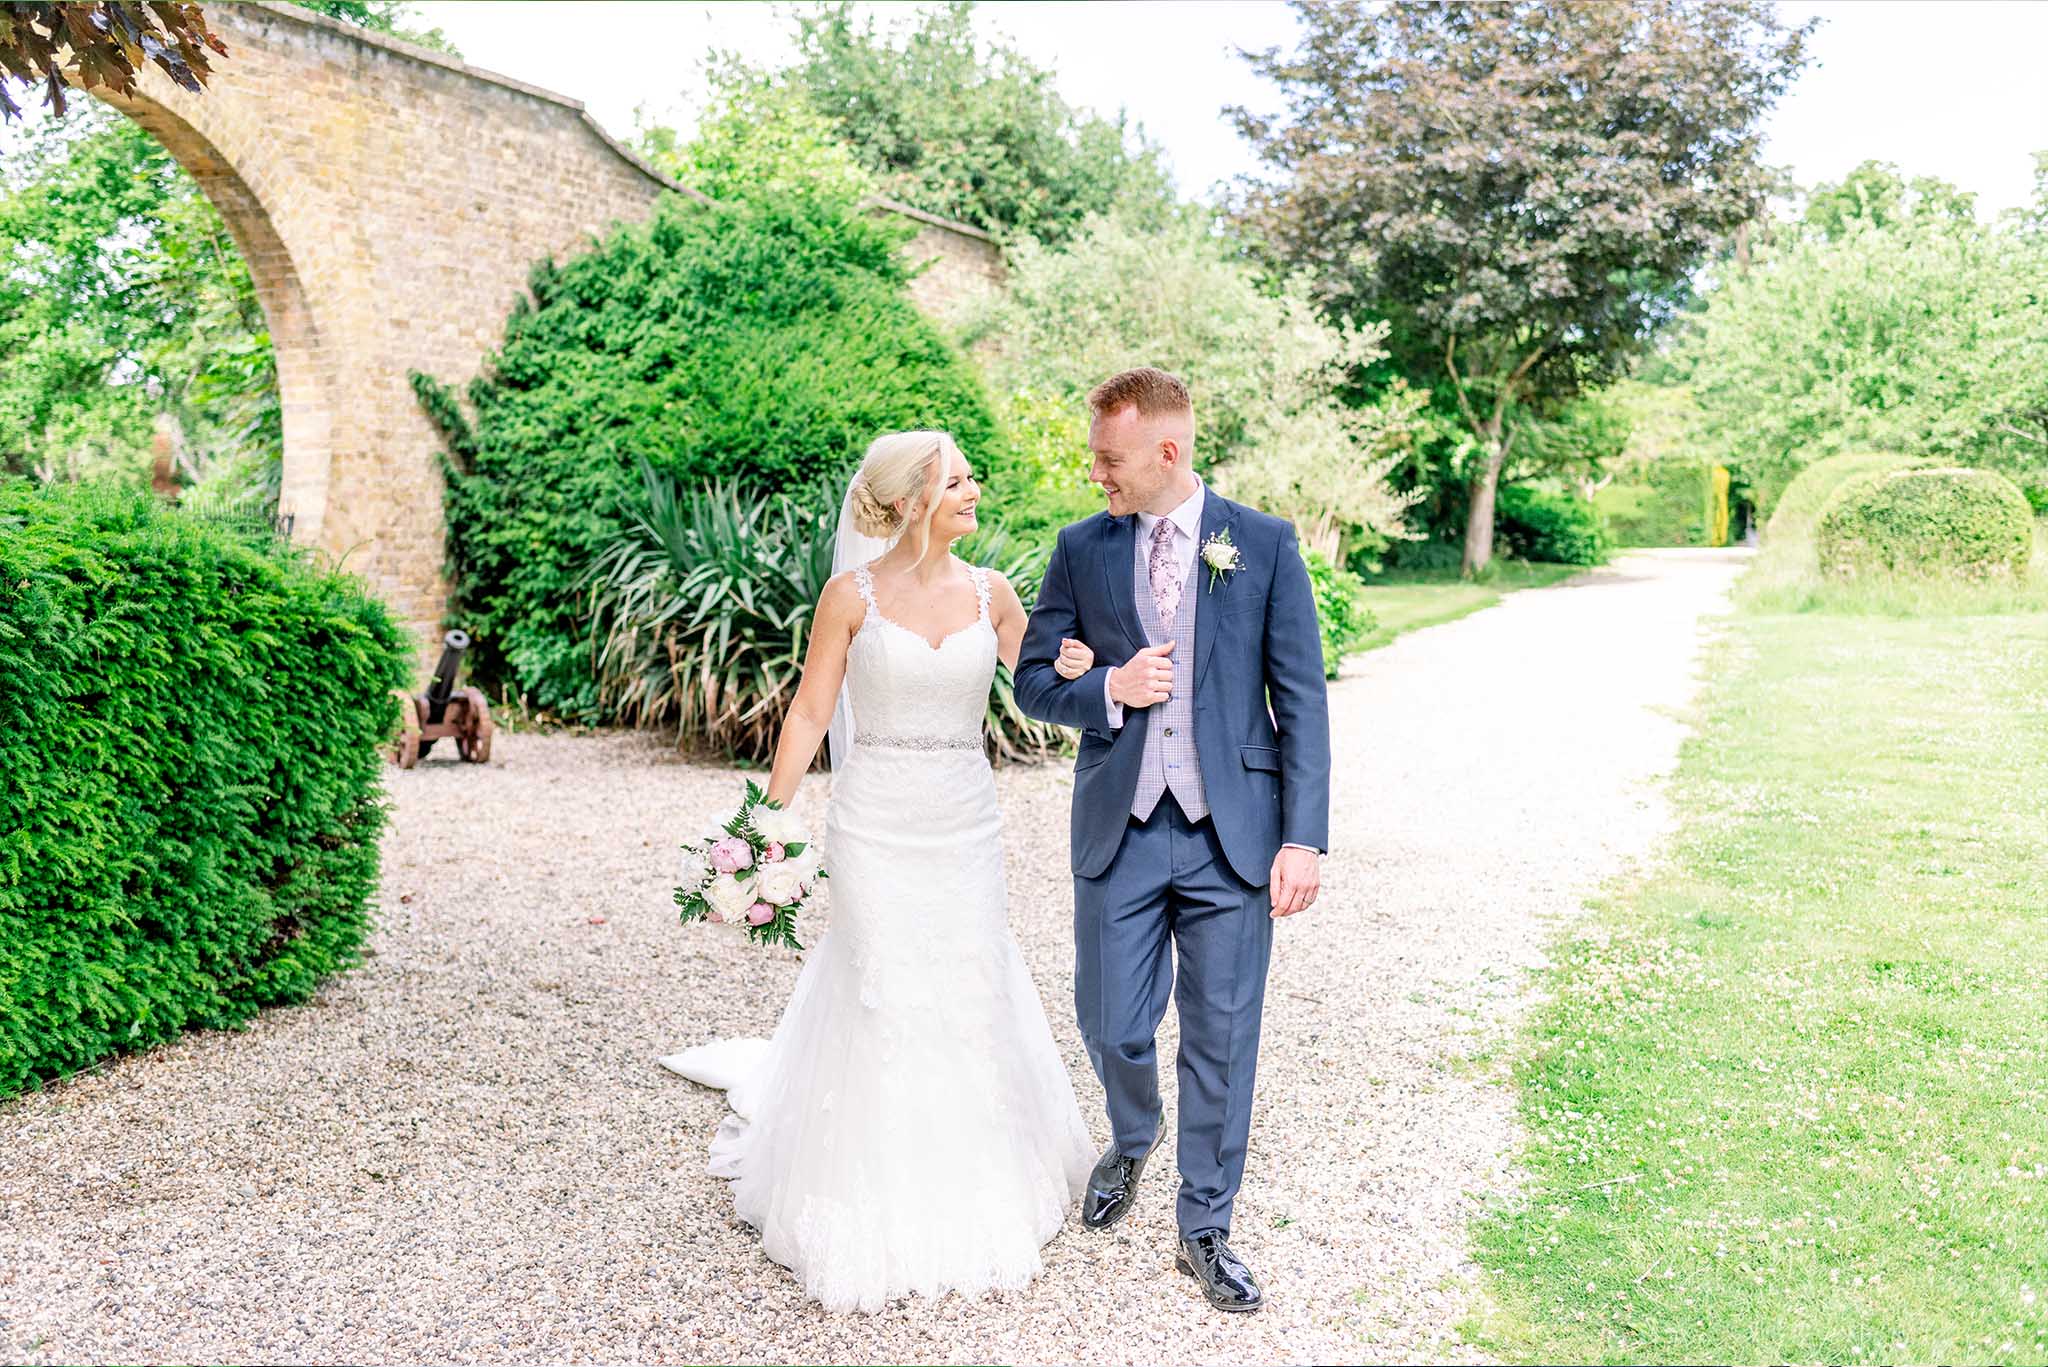 https://usercontent.one/wp/www.natalieandmax.co.uk/wp-content/uploads/2023/03/Hanbury-Manor-Wedding-Photography-by-Natalie-and-Max-Photo-and-Films.jpg?media=1711985334